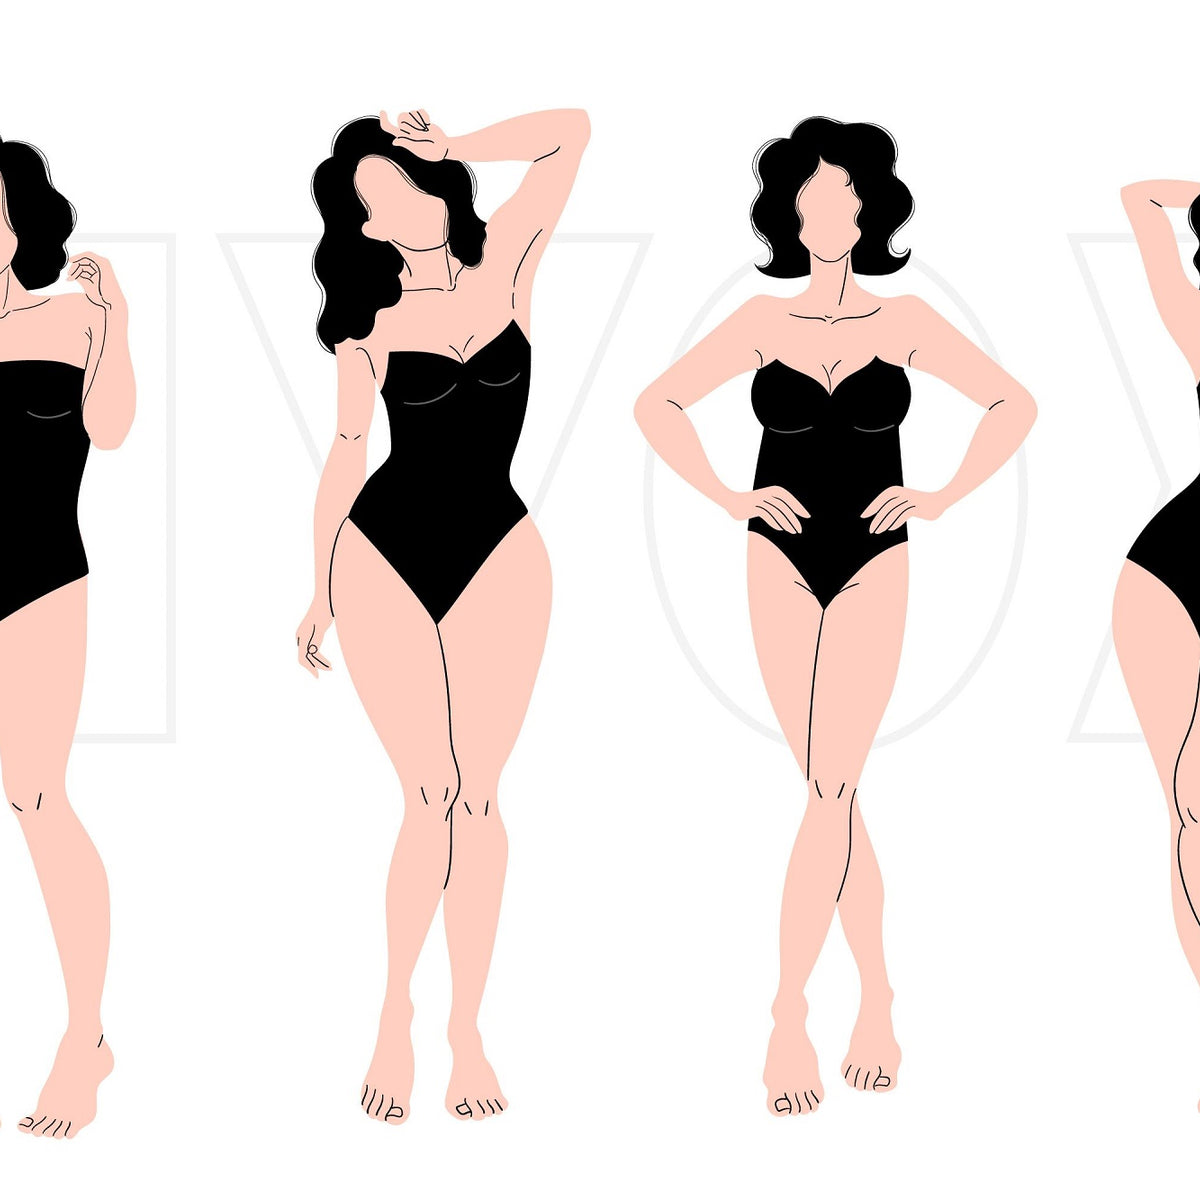 What Is The Best Shapewear To Hide My Love Handles? – The Magic Knicker Shop